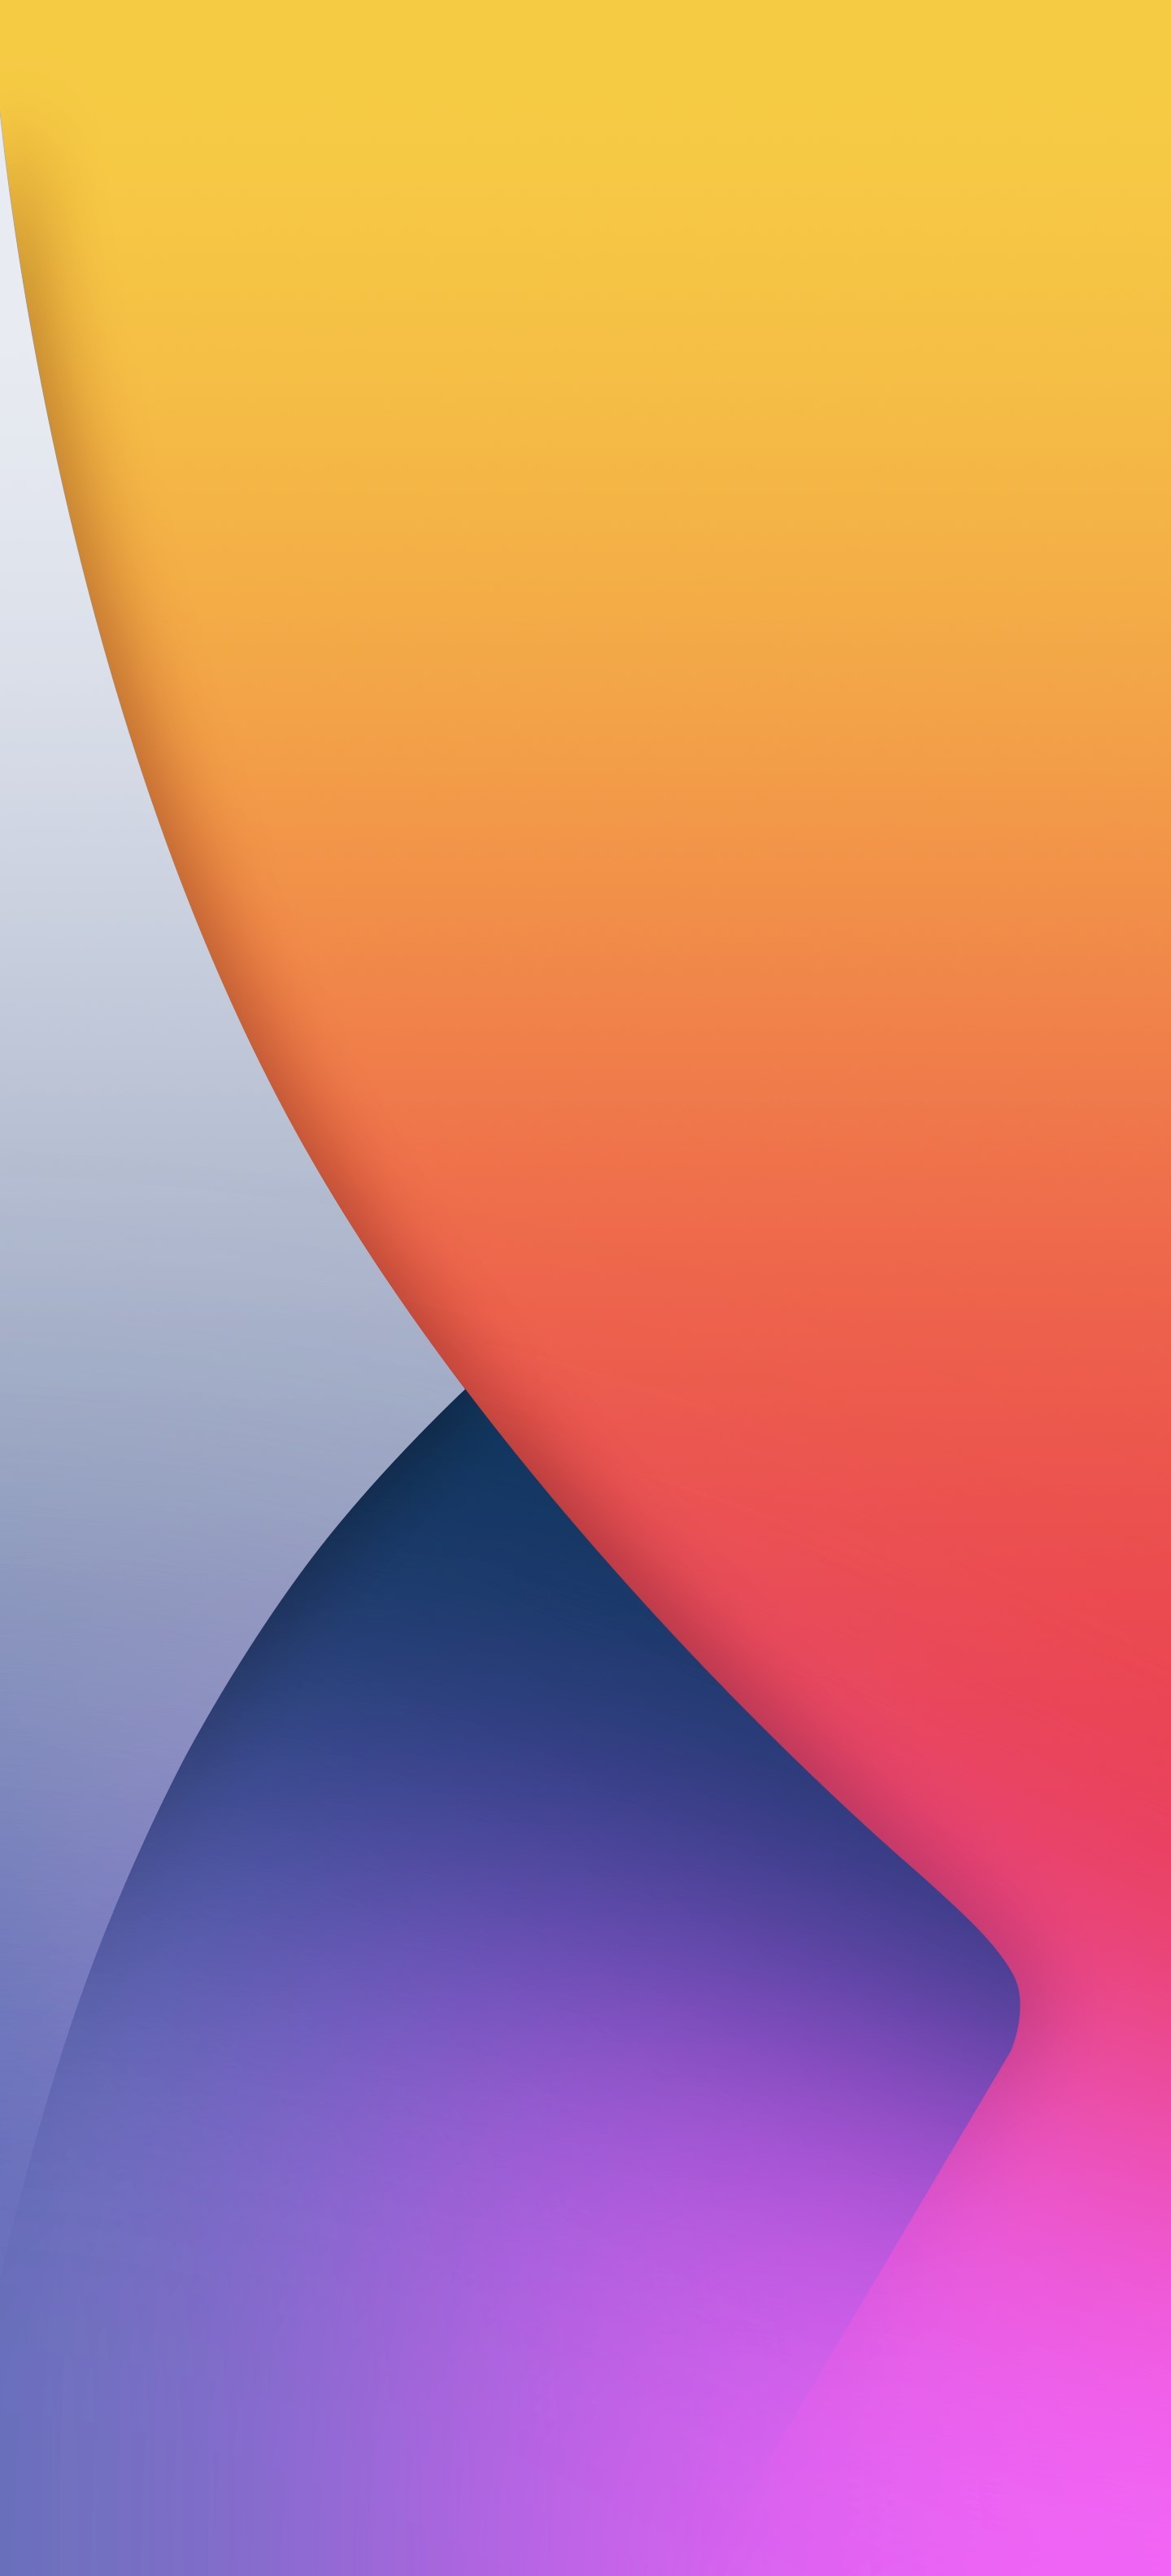 iOS Official Wallpaper - KoLPaPer - Awesome Free HD Wallpapers